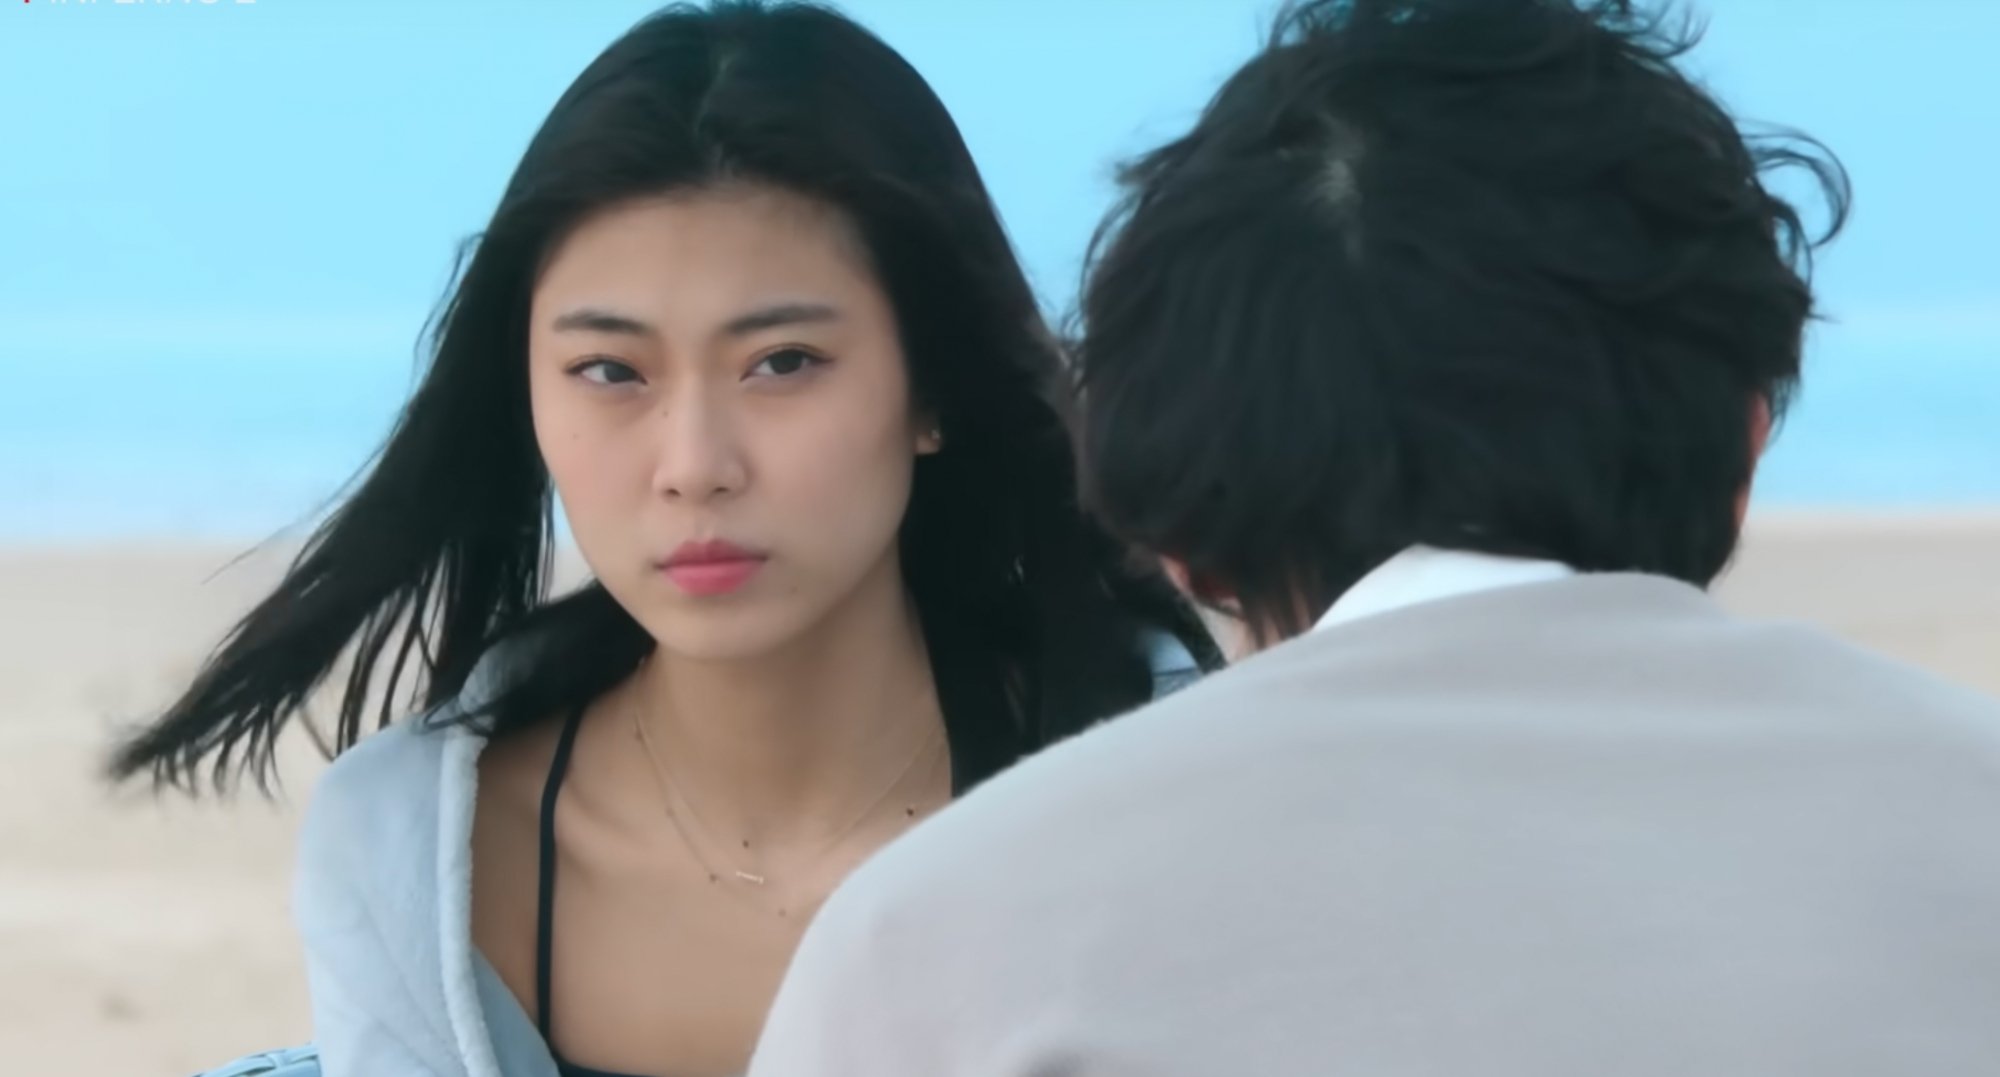 Nadine from 'Single's Inferno' Season 2 and Jin-young on the beach.